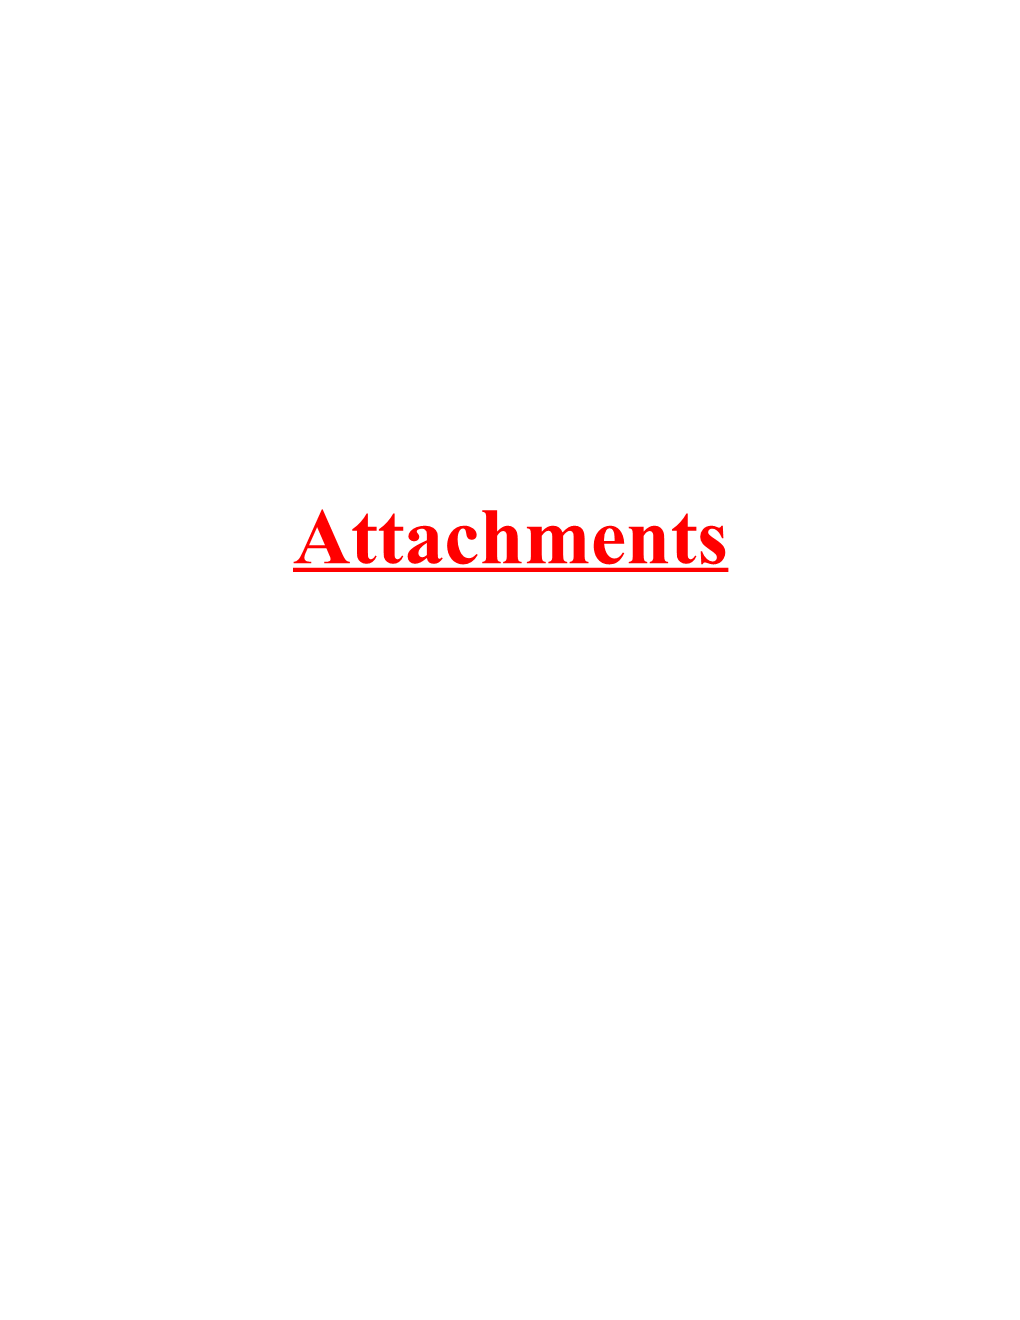 List of Attachments